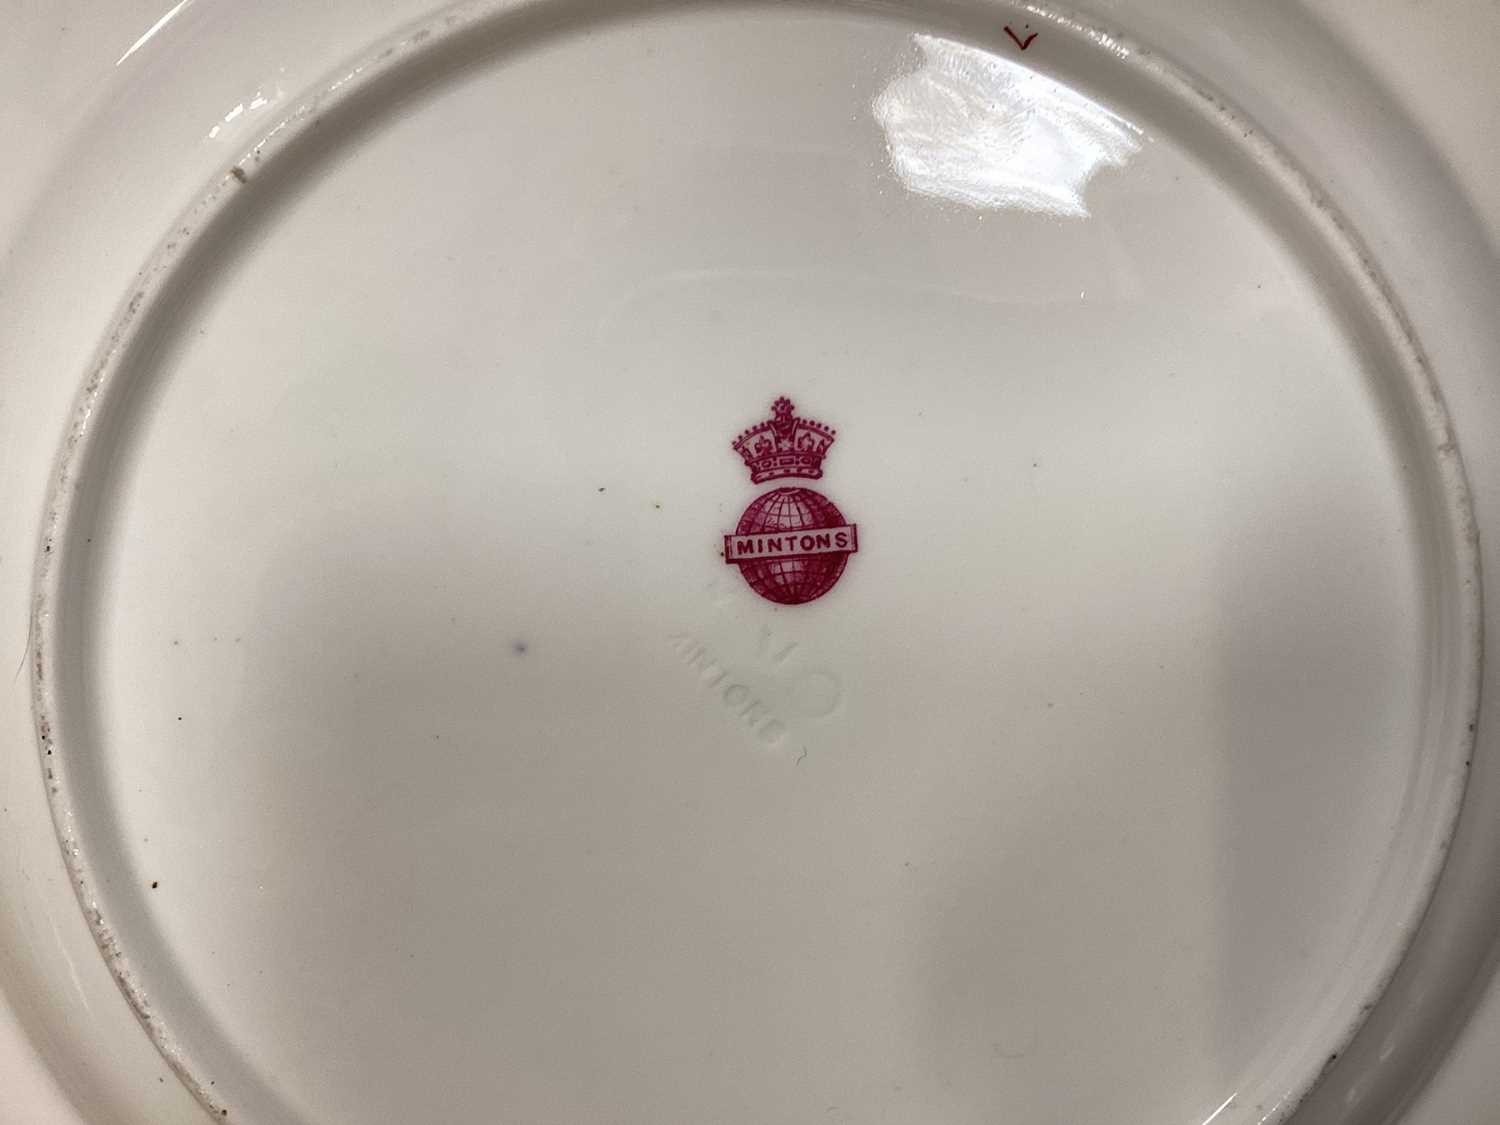 Victorian Mintons armorial service & Spode Pink Tower ware - Image 3 of 4